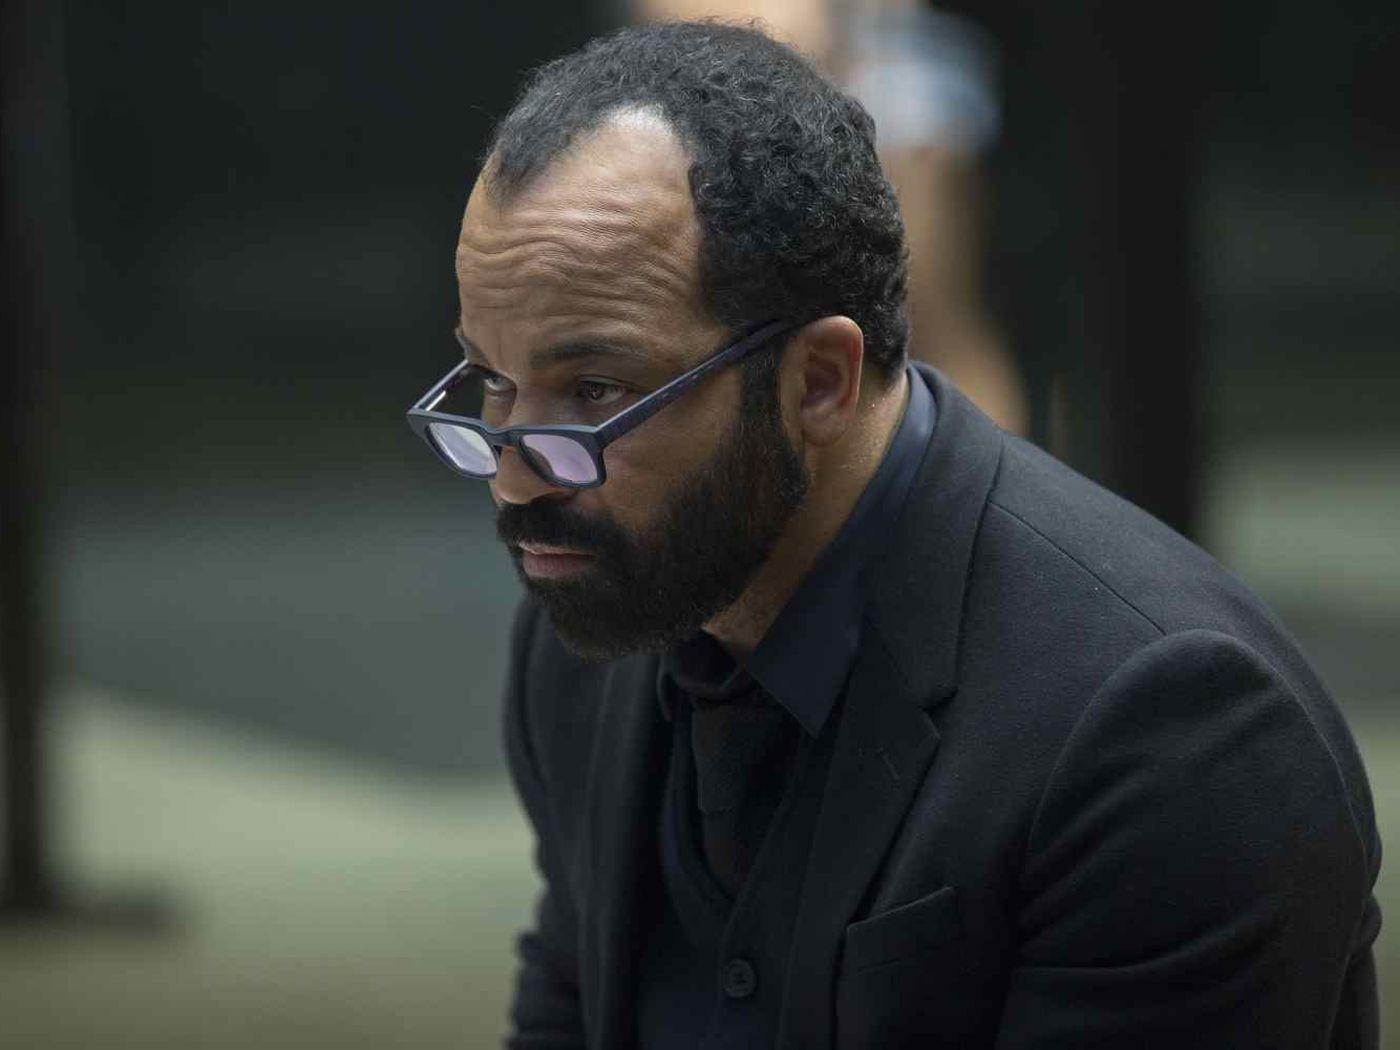 Westworld Season Episode 9: “The Well Tempered Clavier” Reveals